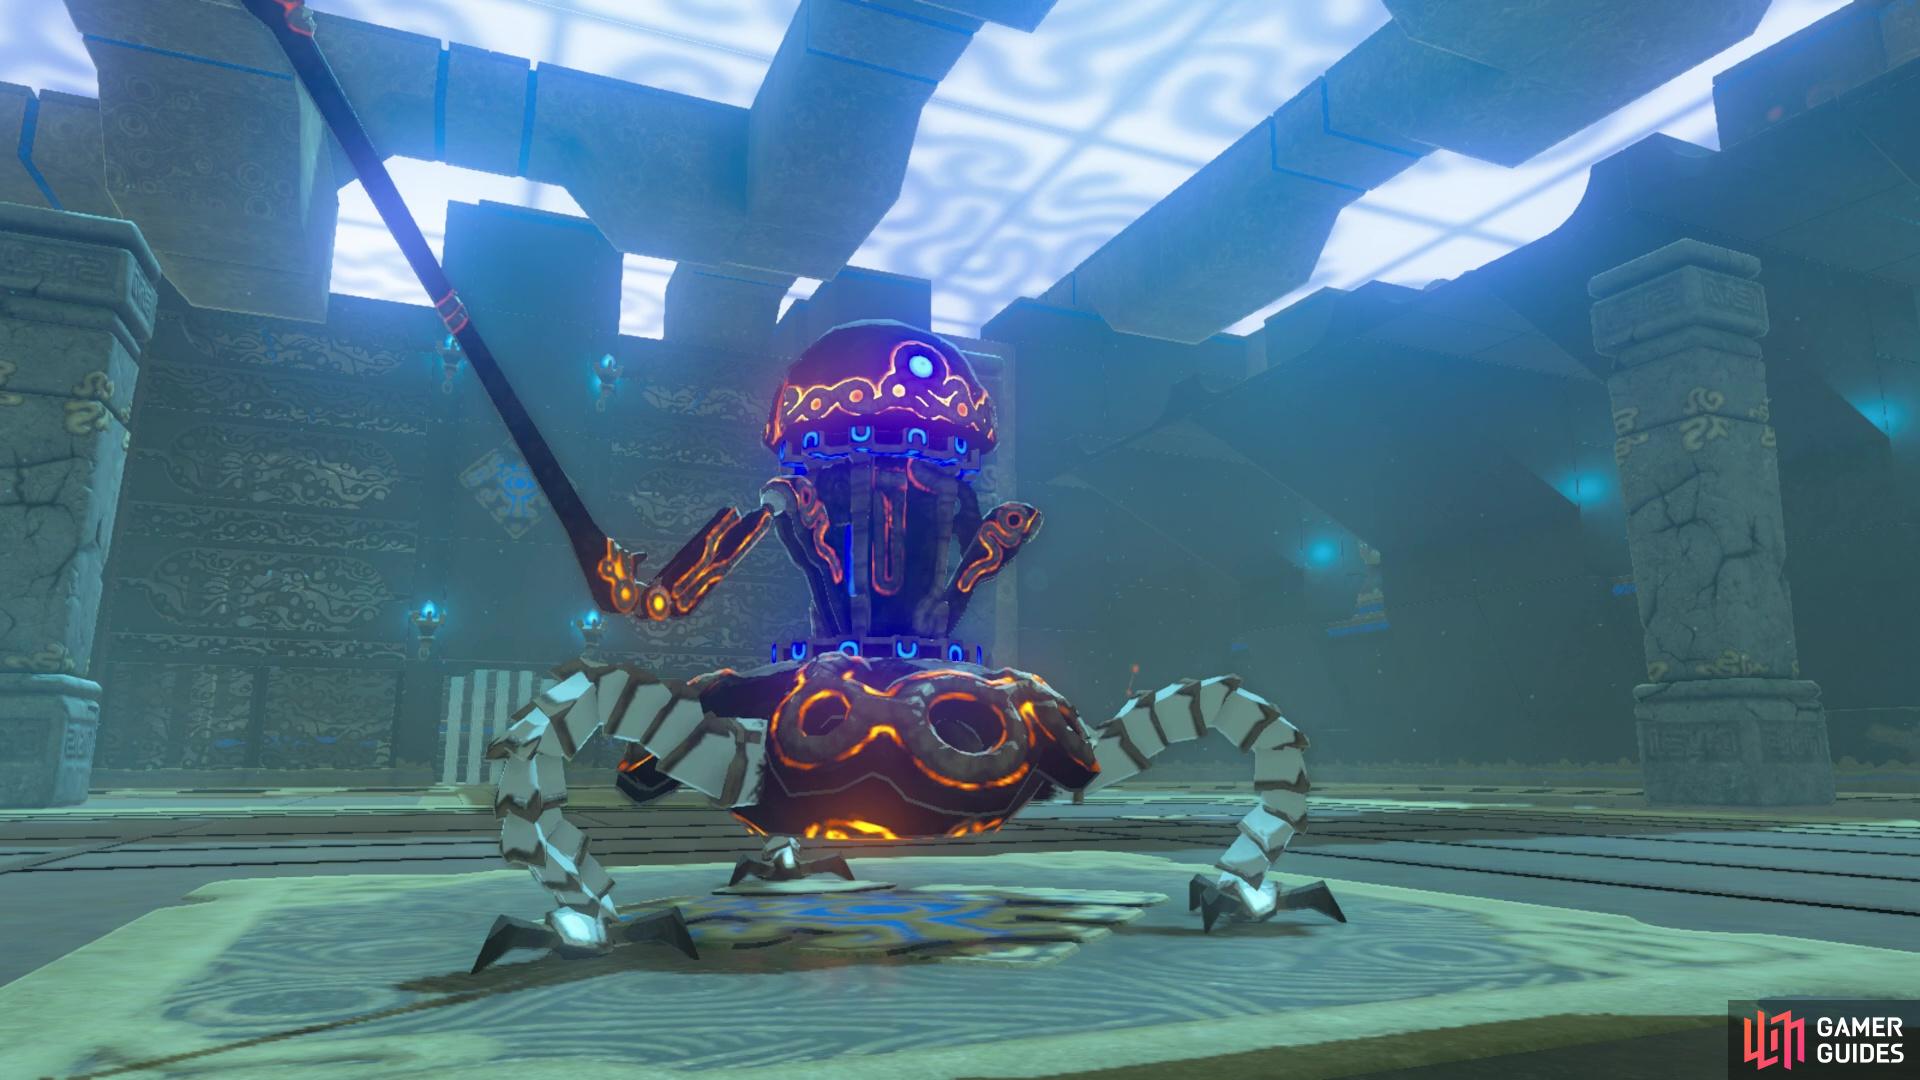 The Guardian enemy at this shrine wields a Guardian Spear.